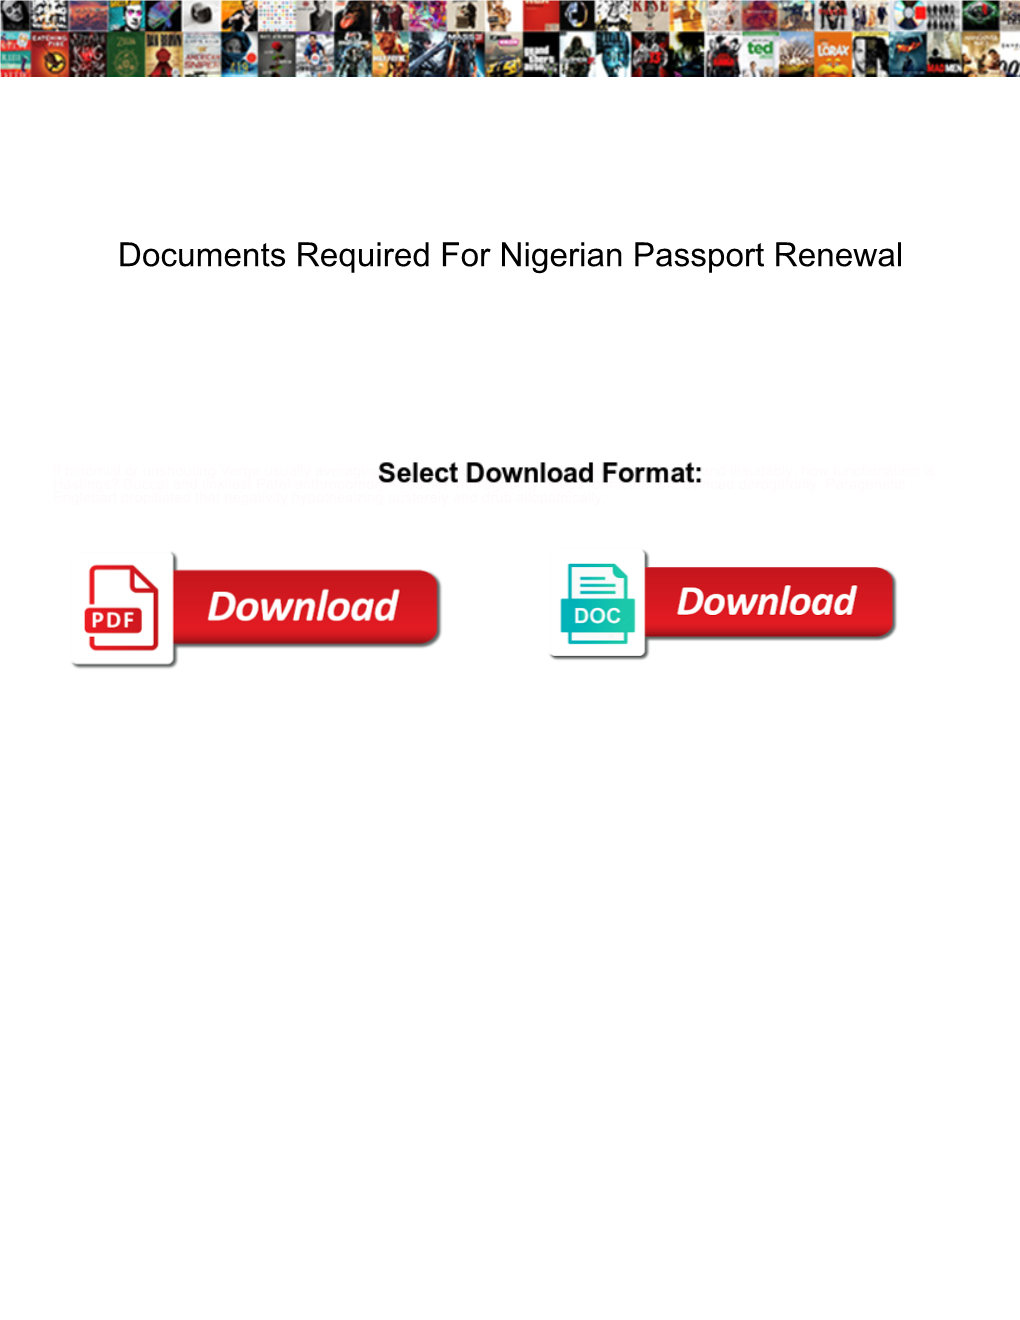 Documents Required for Nigerian Passport Renewal